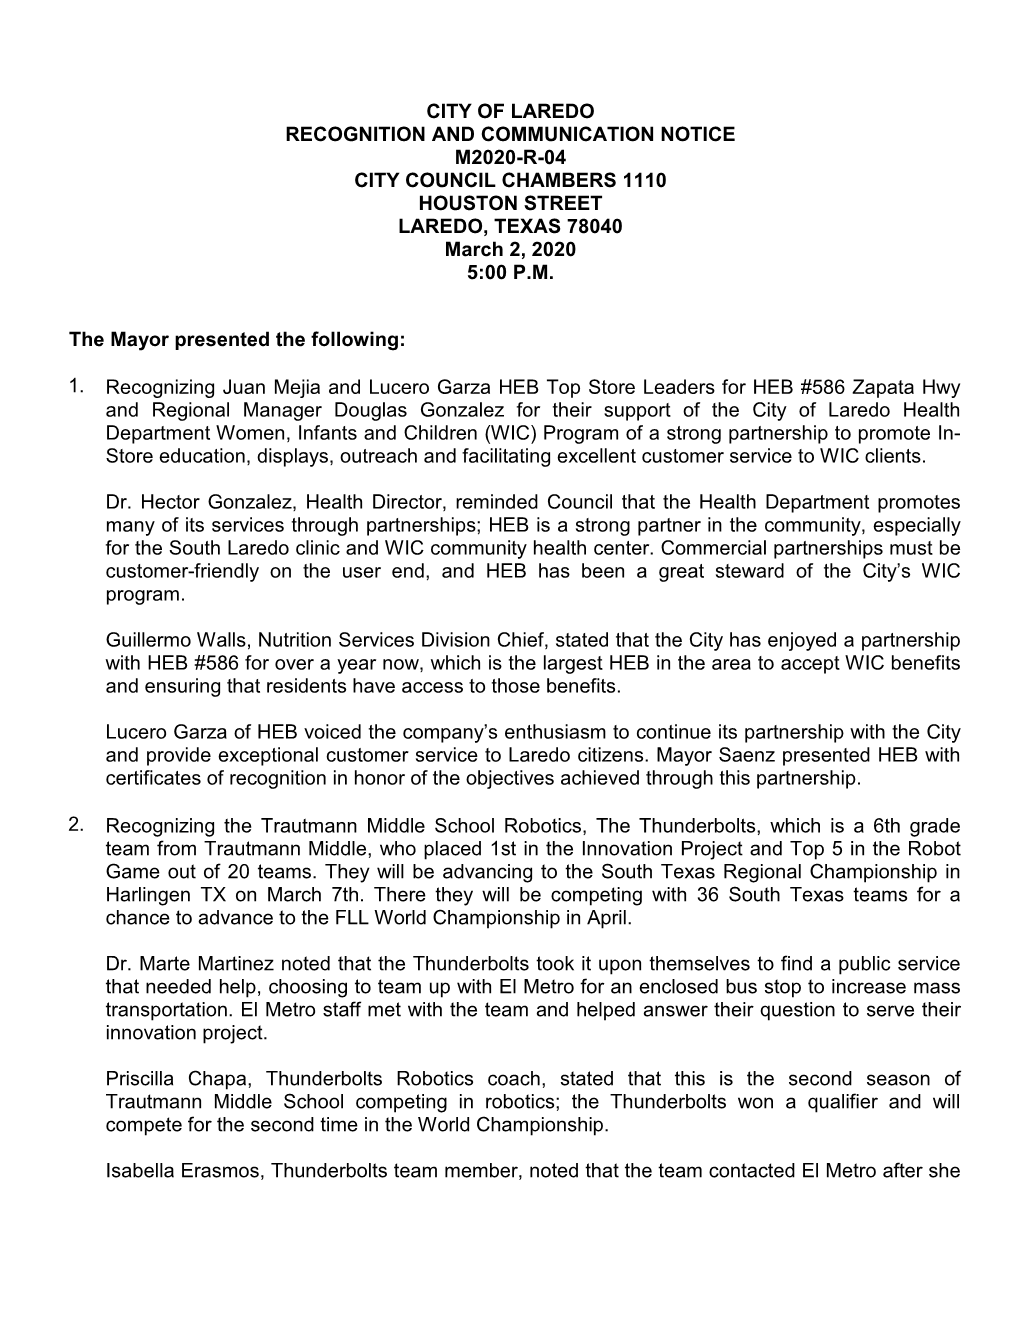 CITY of LAREDO RECOGNITION and COMMUNICATION NOTICE M2020-R-04 CITY COUNCIL CHAMBERS 1110 HOUSTON STREET LAREDO, TEXAS 78040 March 2, 2020 5:00 P.M